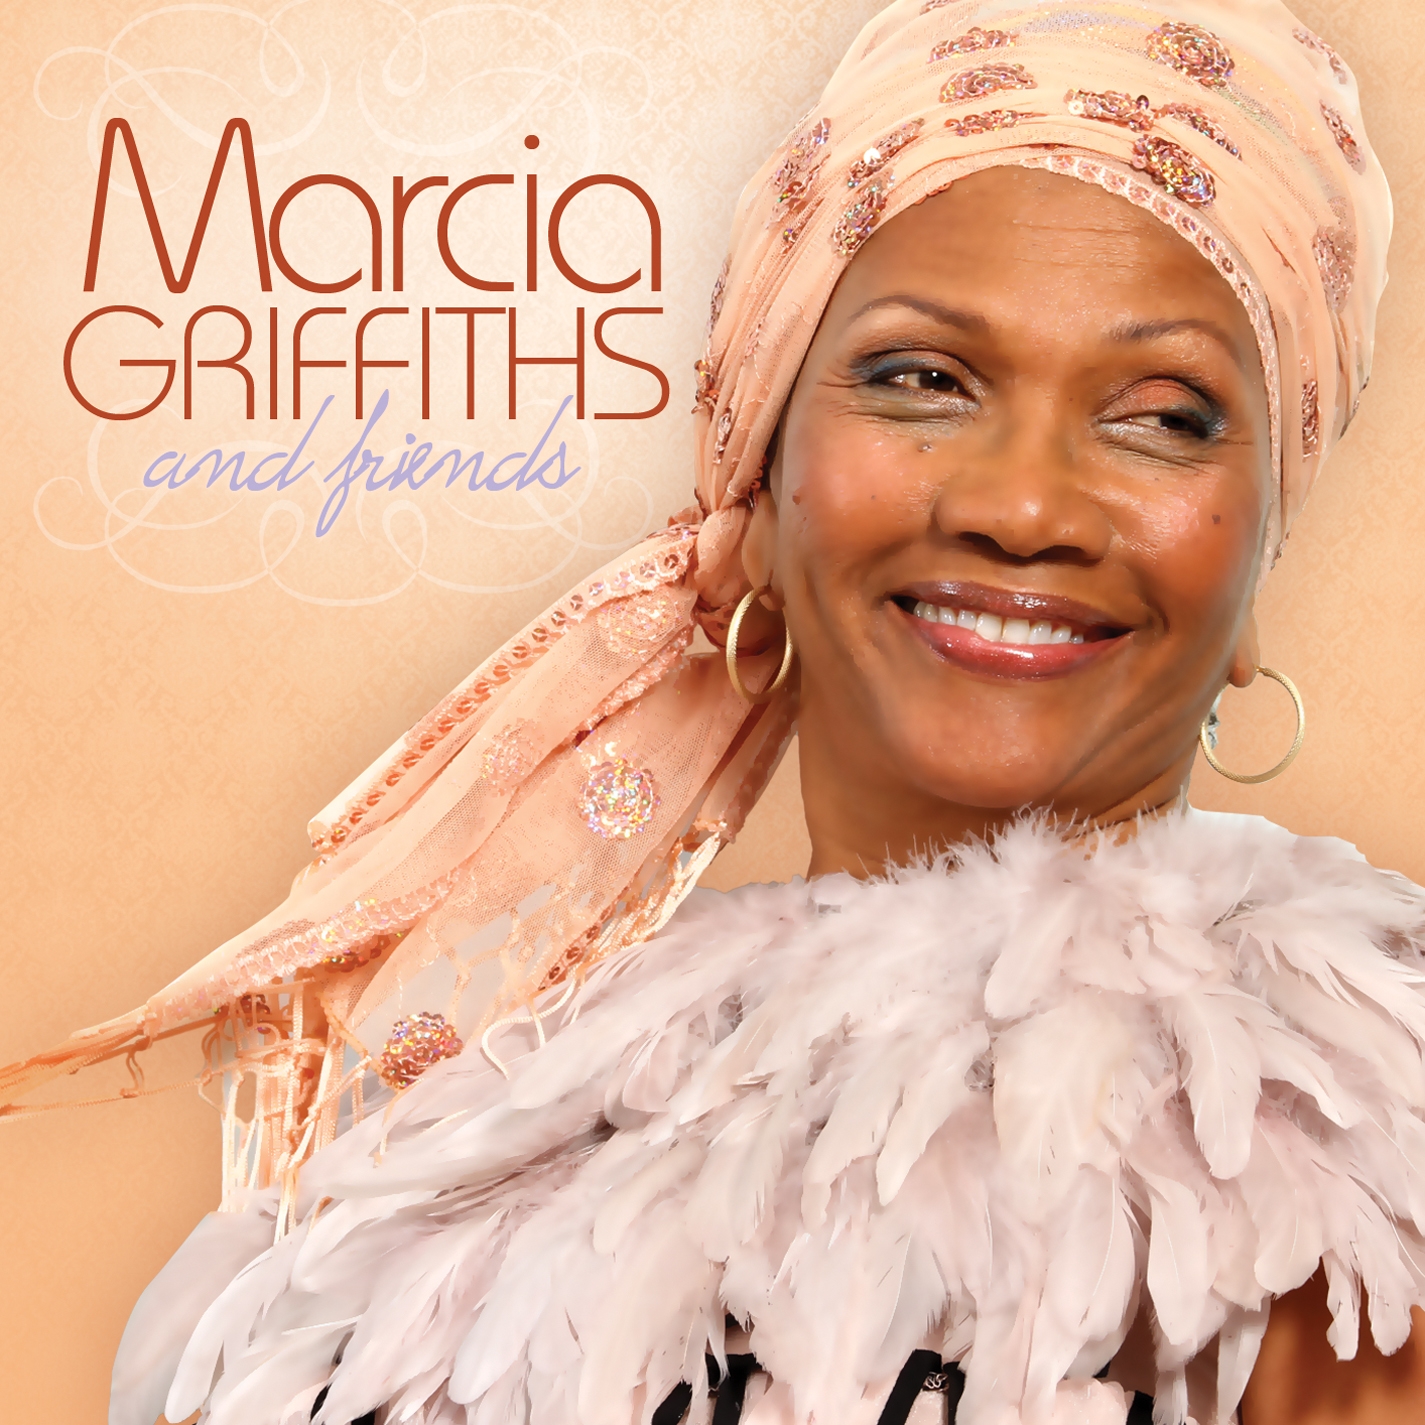 marcia-griffiths-marcia-griffiths-and-friends-artwork.jpg